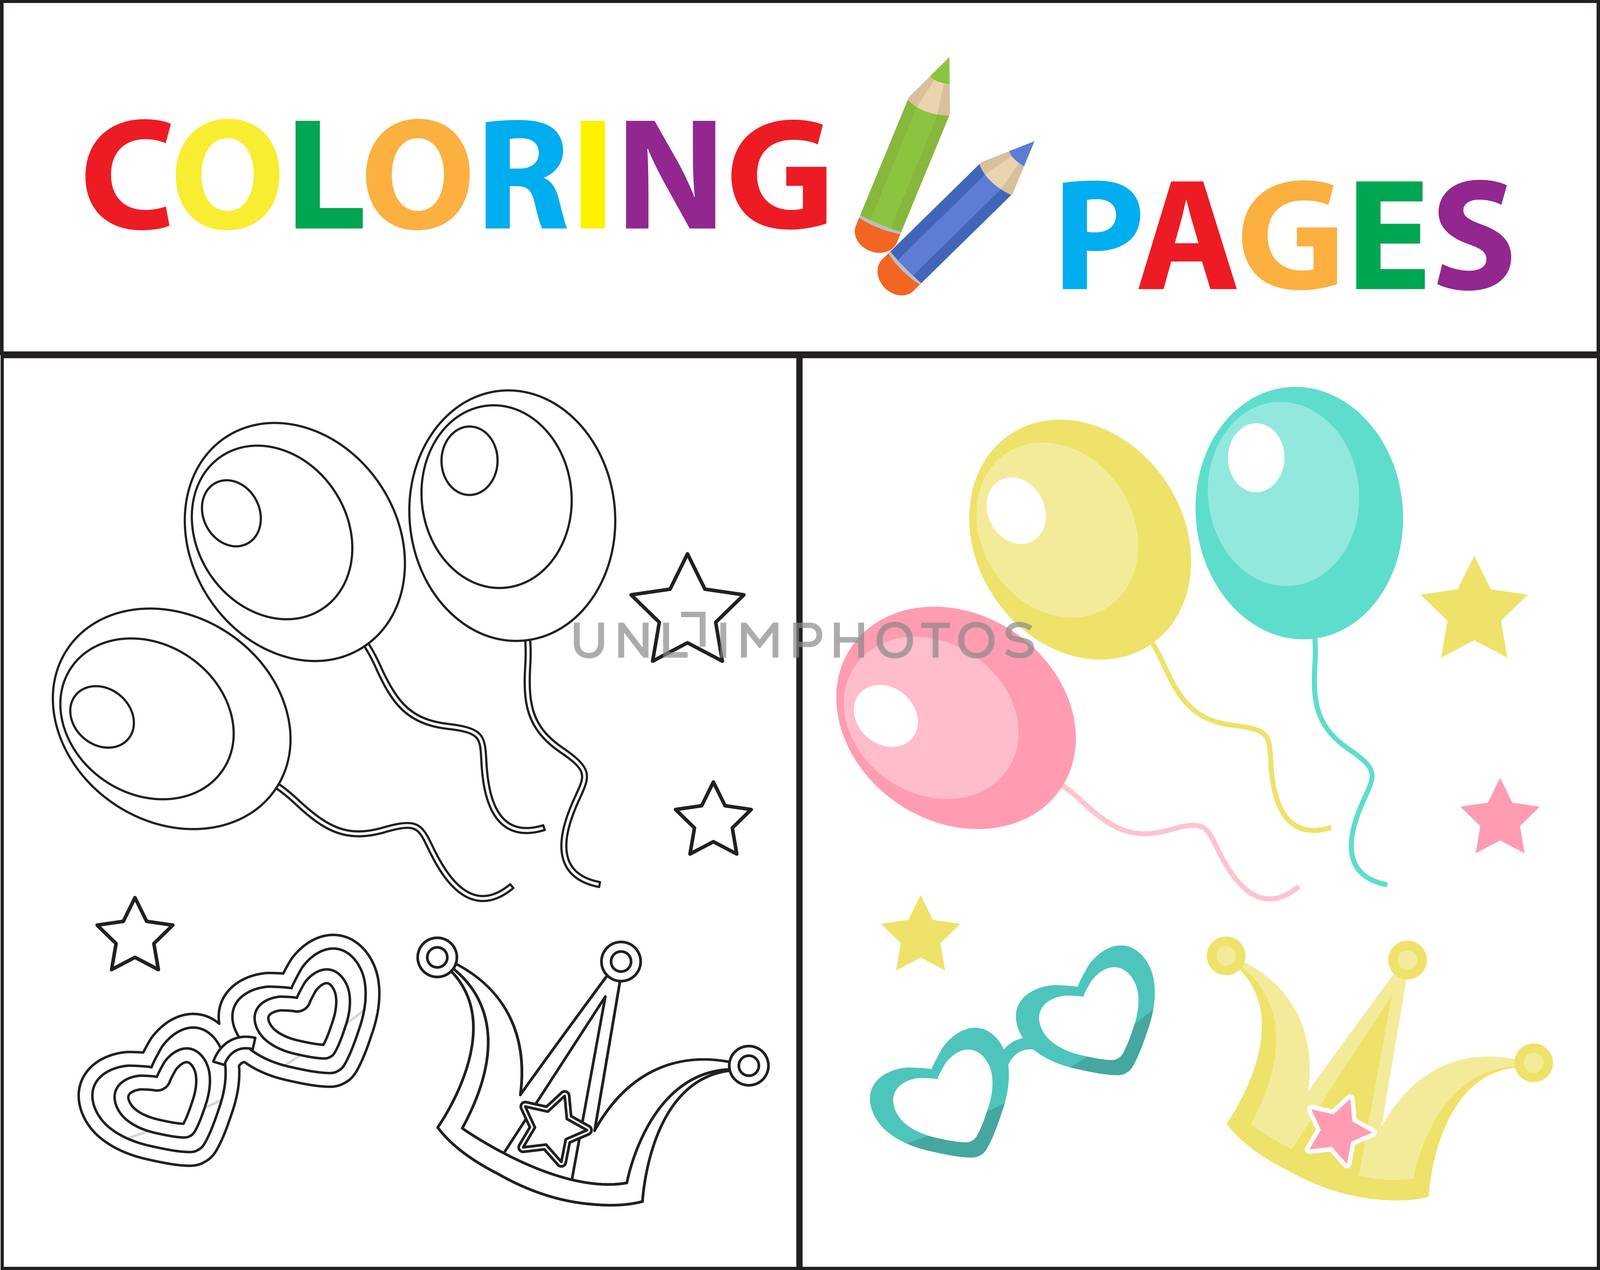 Coloring book page for kids. Birthday balloons, carnival set. Sketch outline and color version. Childrens education. illustration